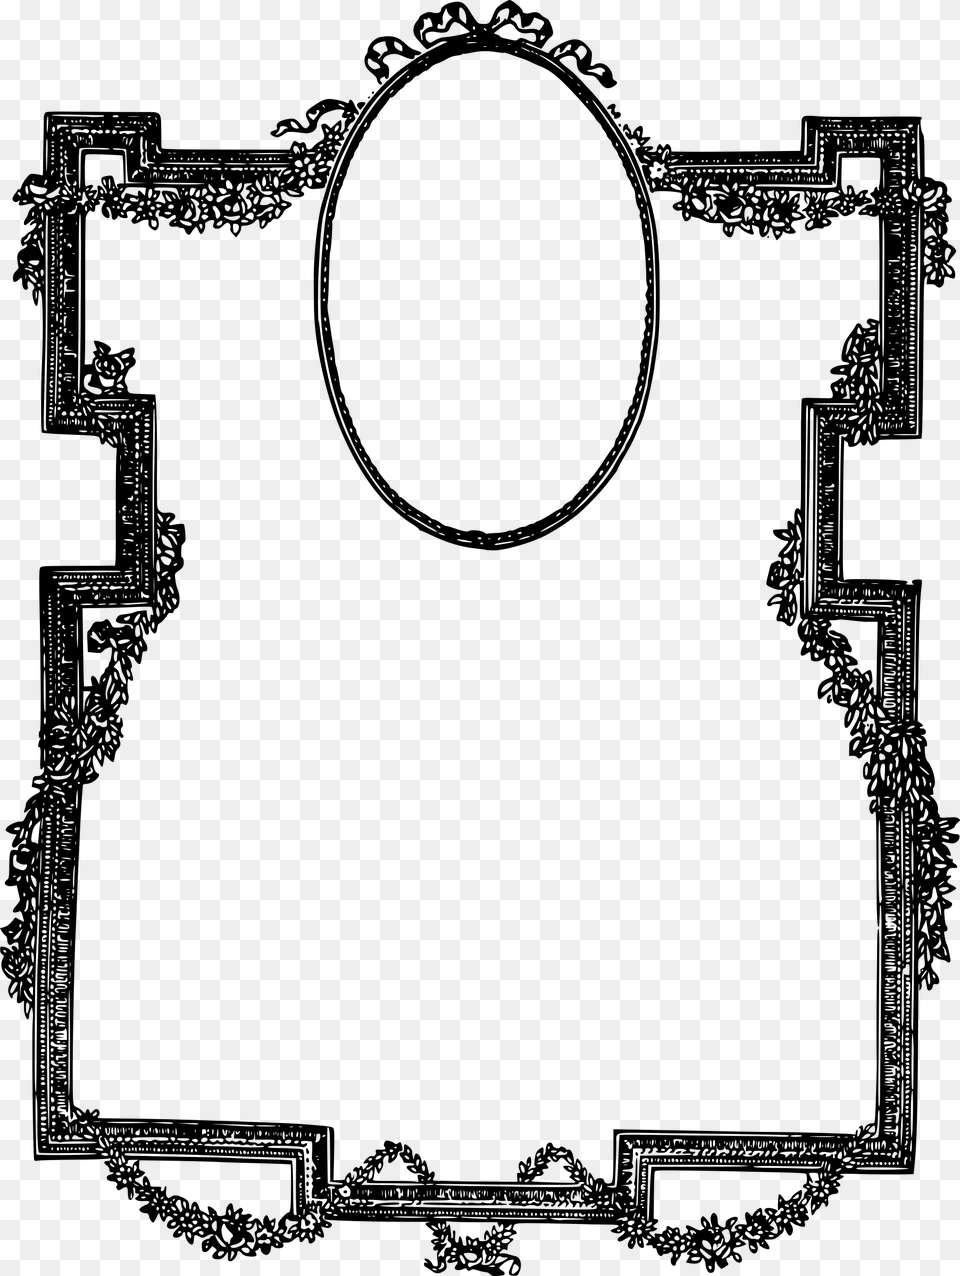 Borders And Frames Decorative Borders Picture Frames Clip Art, Gray Free Transparent Png